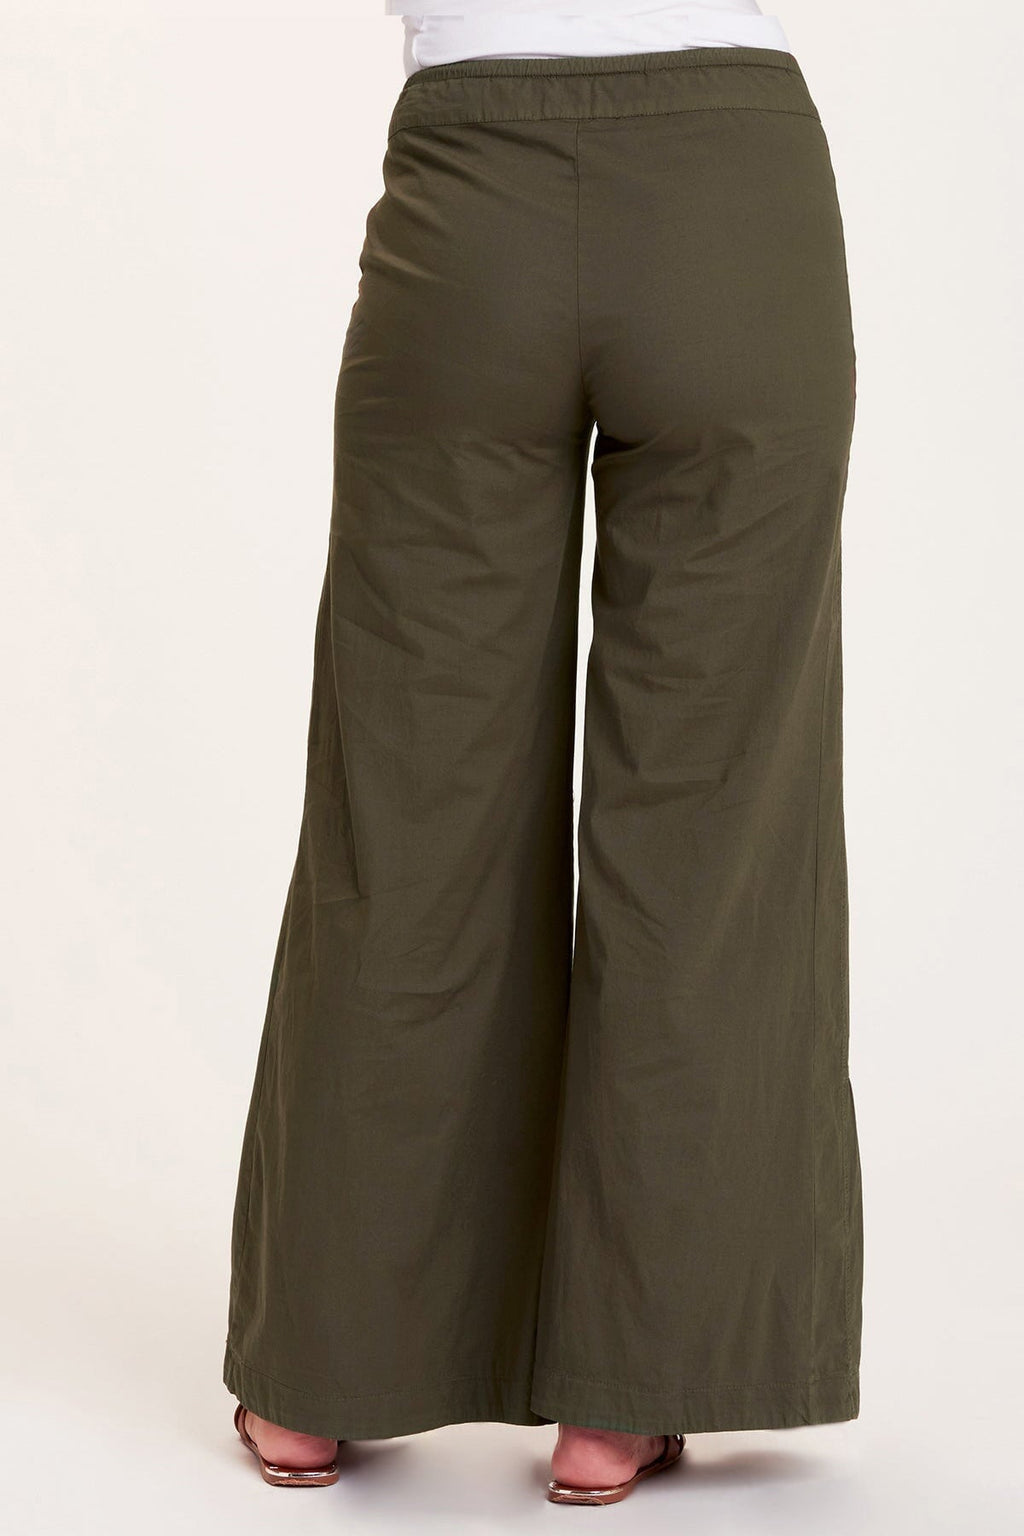 Casual Wear Army Green Rayon Palazzo Pants for Girls